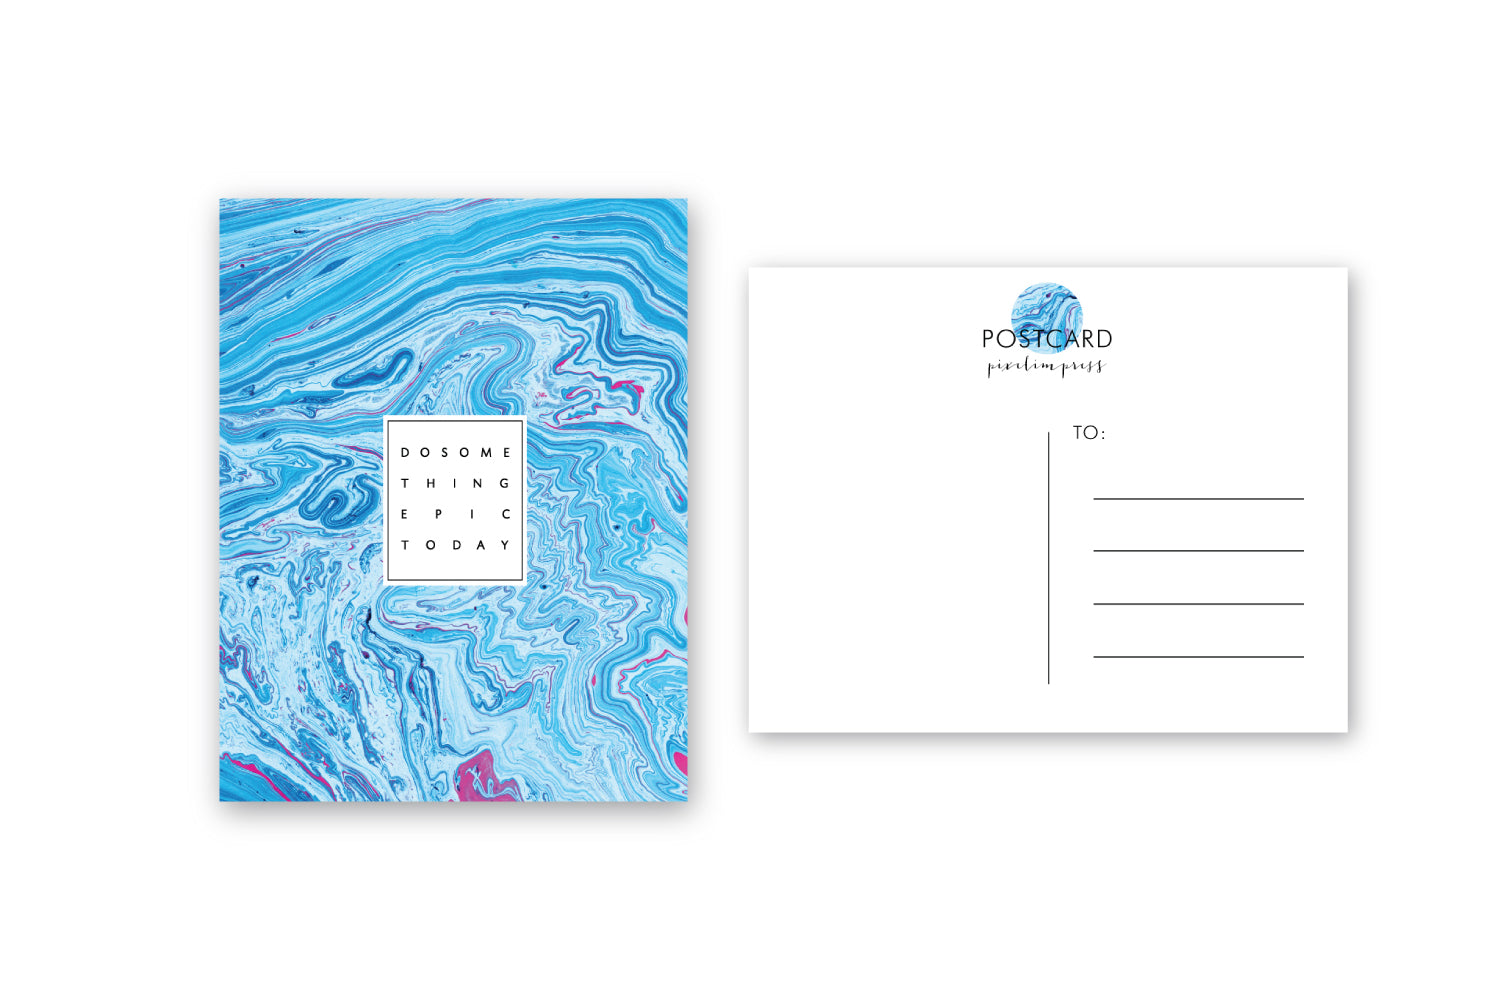 SOMETHING EPIC TODAY Blue + Fuschia Marble Postcards - set of 10